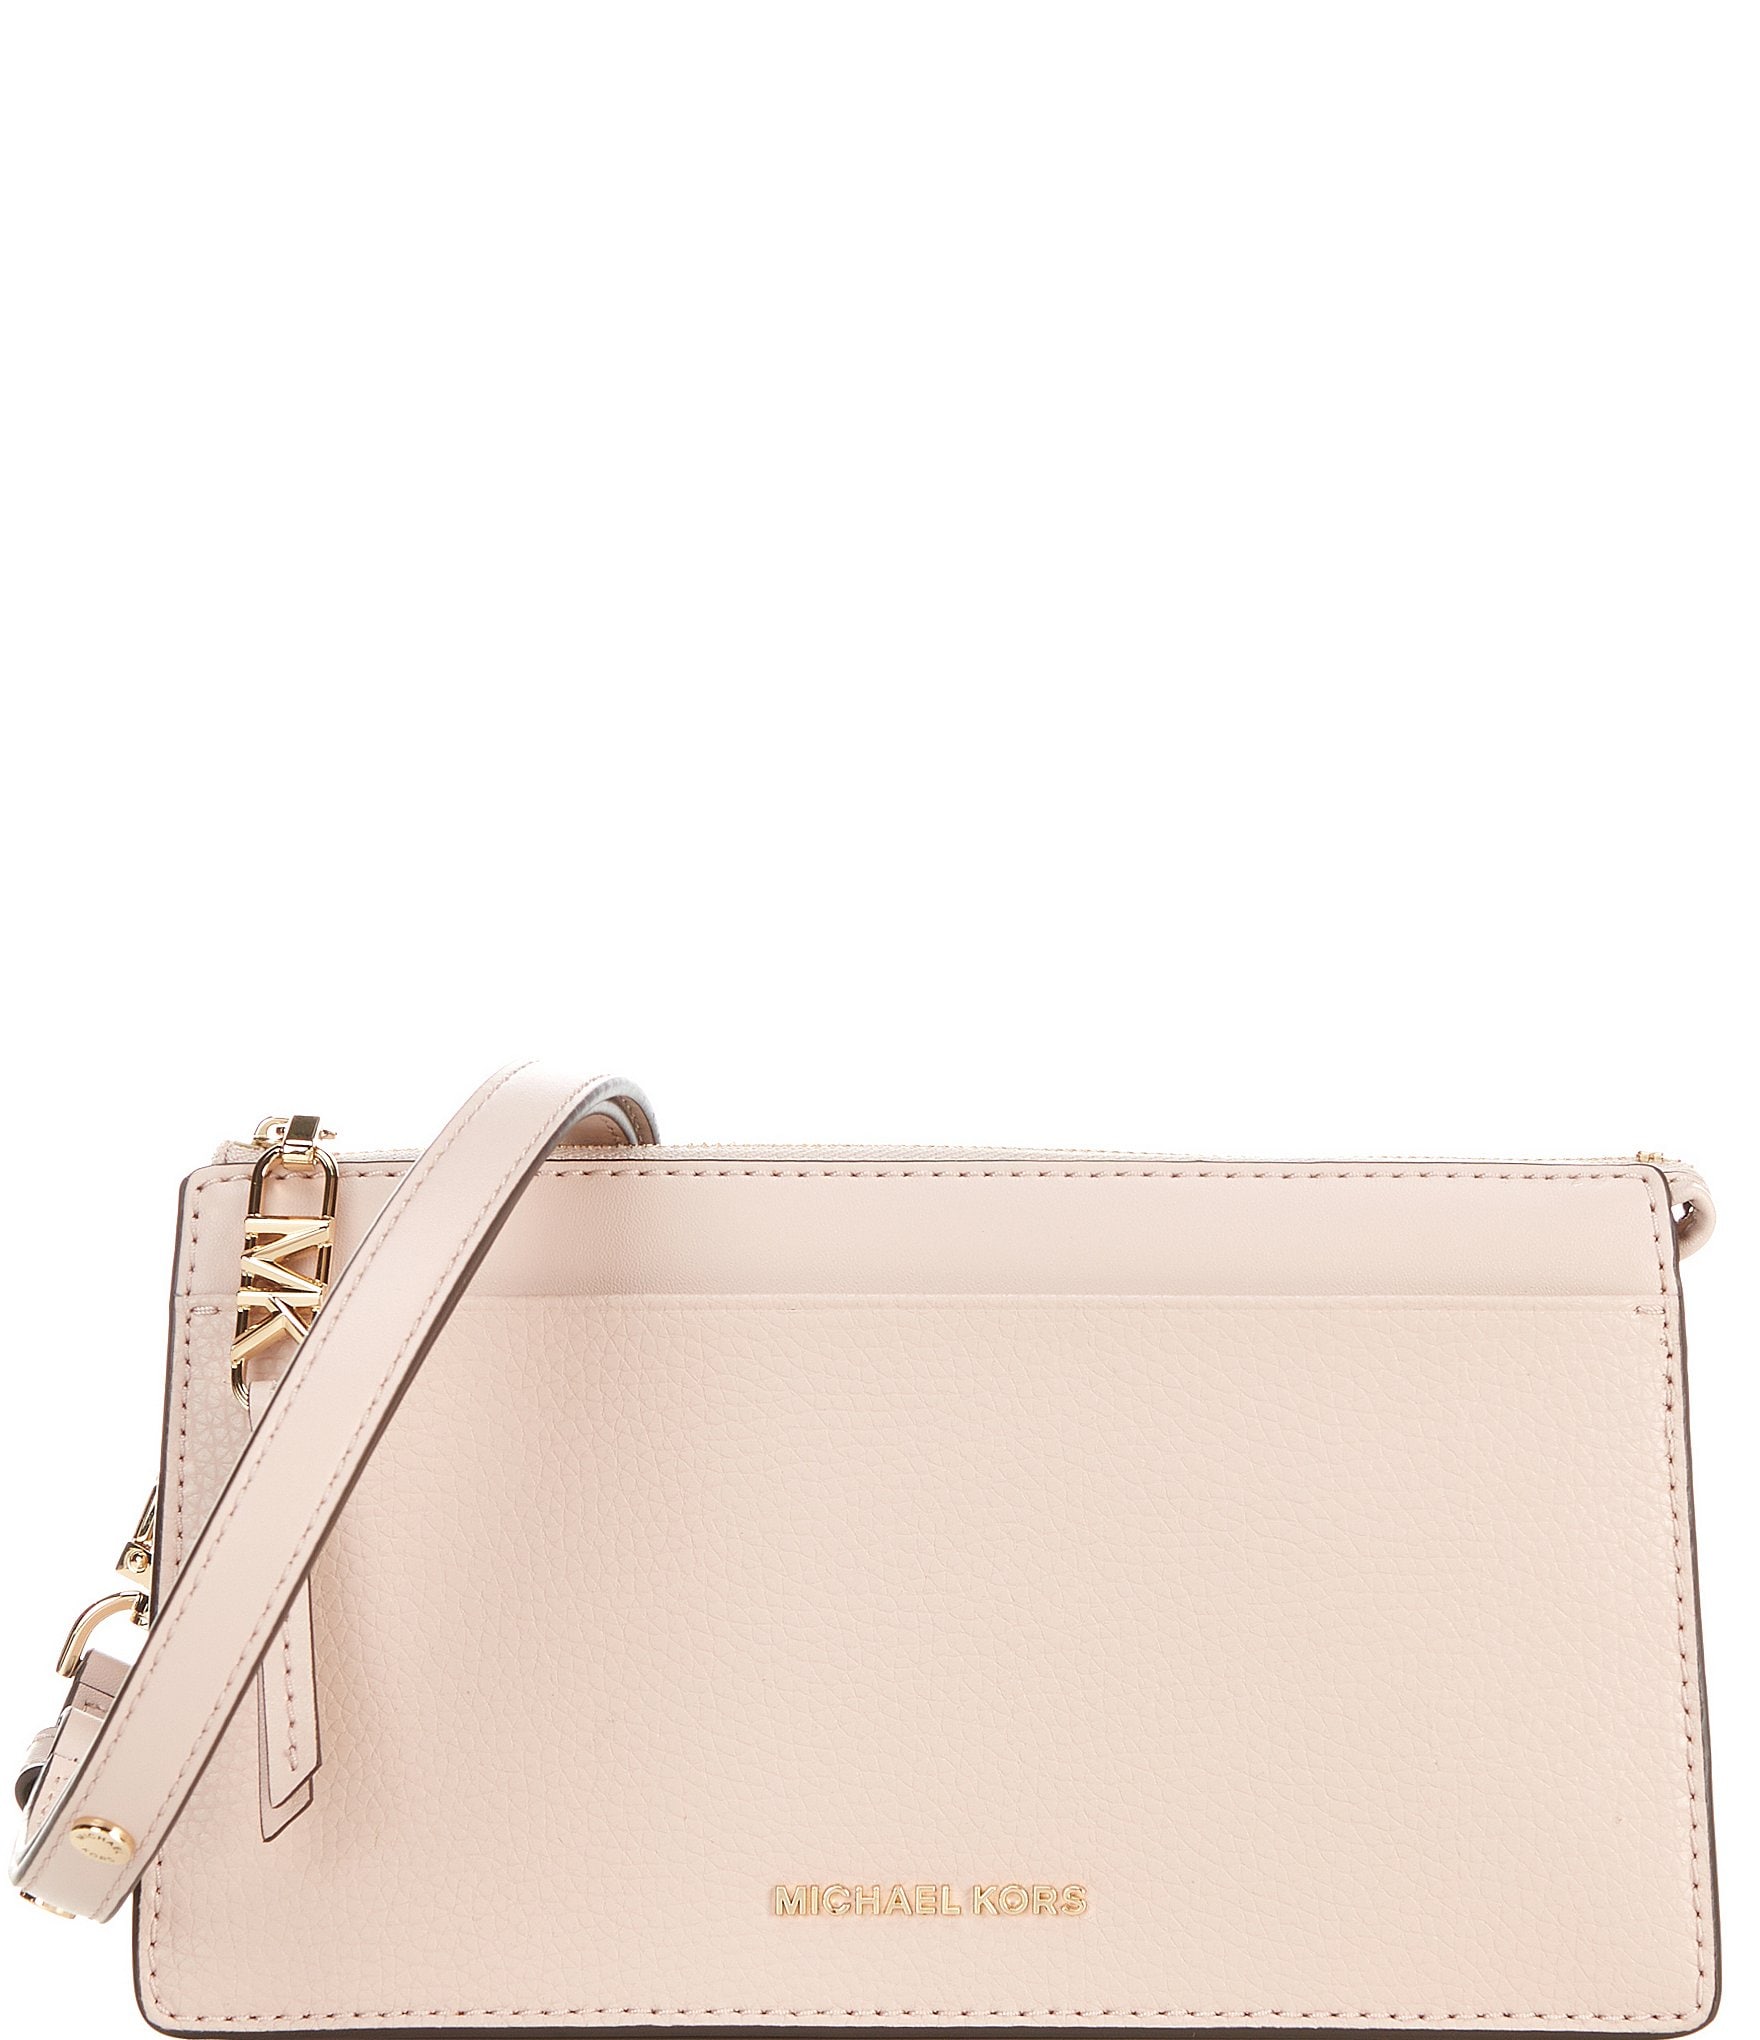 Leather crossbody bag Michael Kors Pink in Leather - 26073651